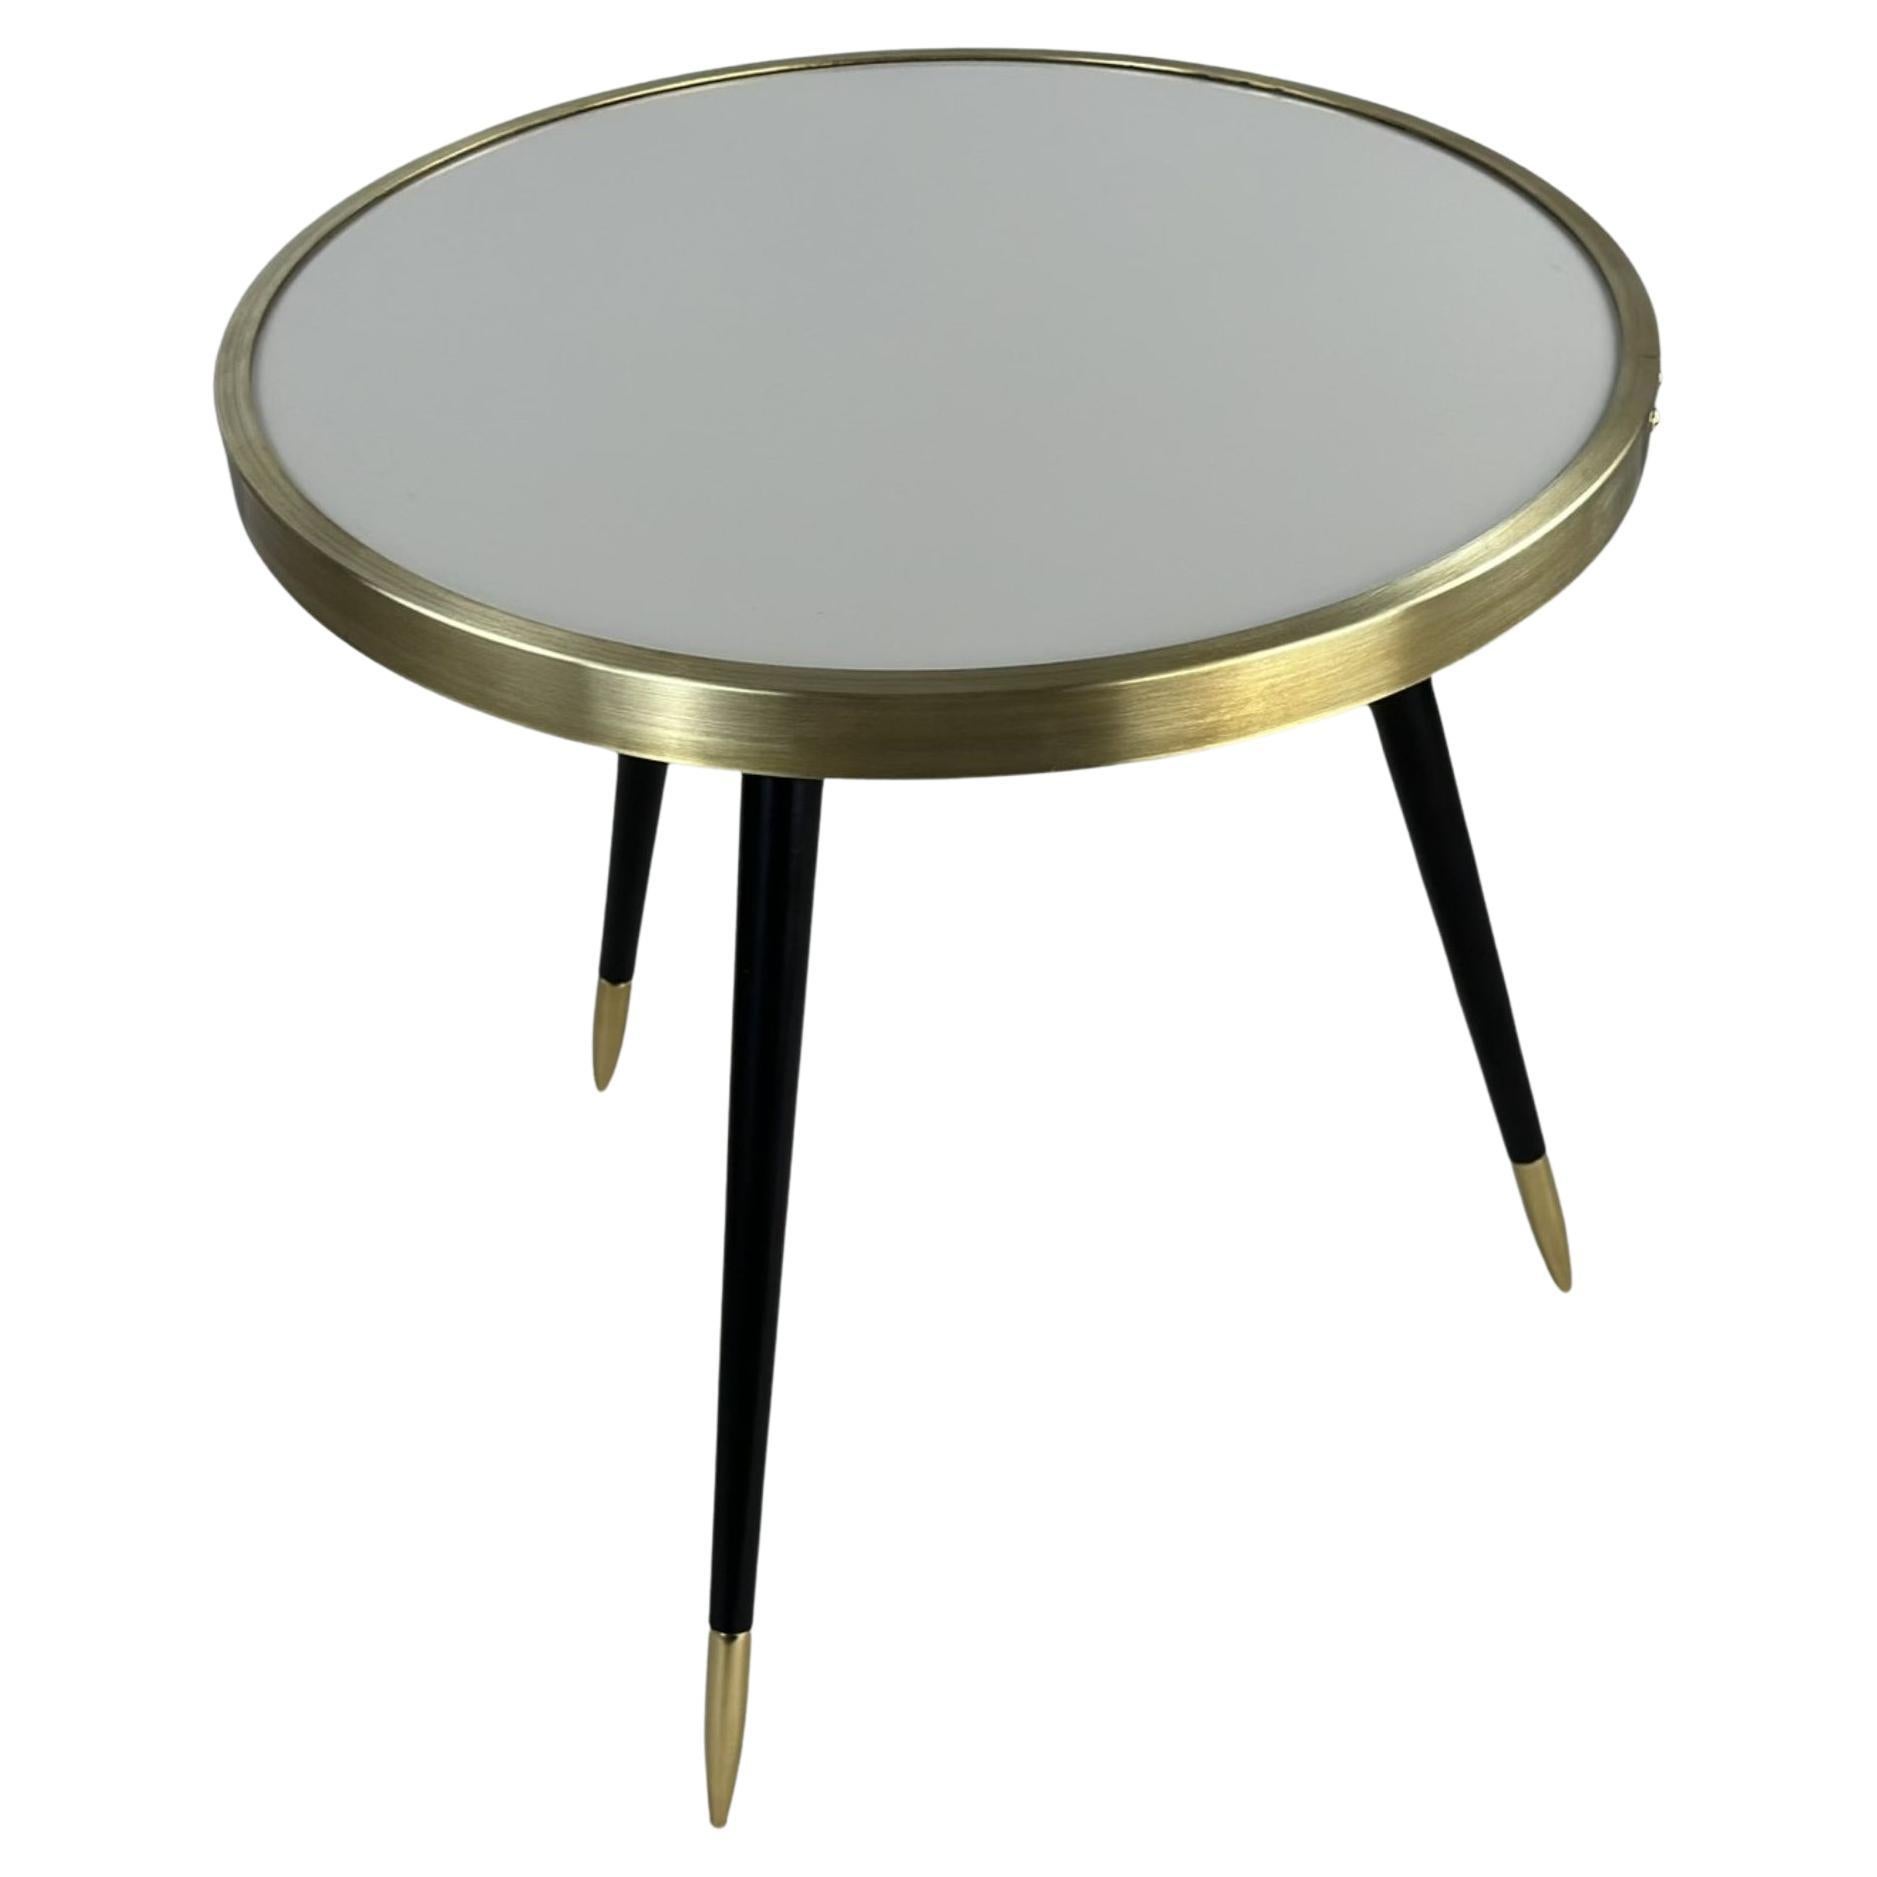 Round Twist Table, High Gloss Laminate & Brass Details, Handcrafted, Size M For Sale